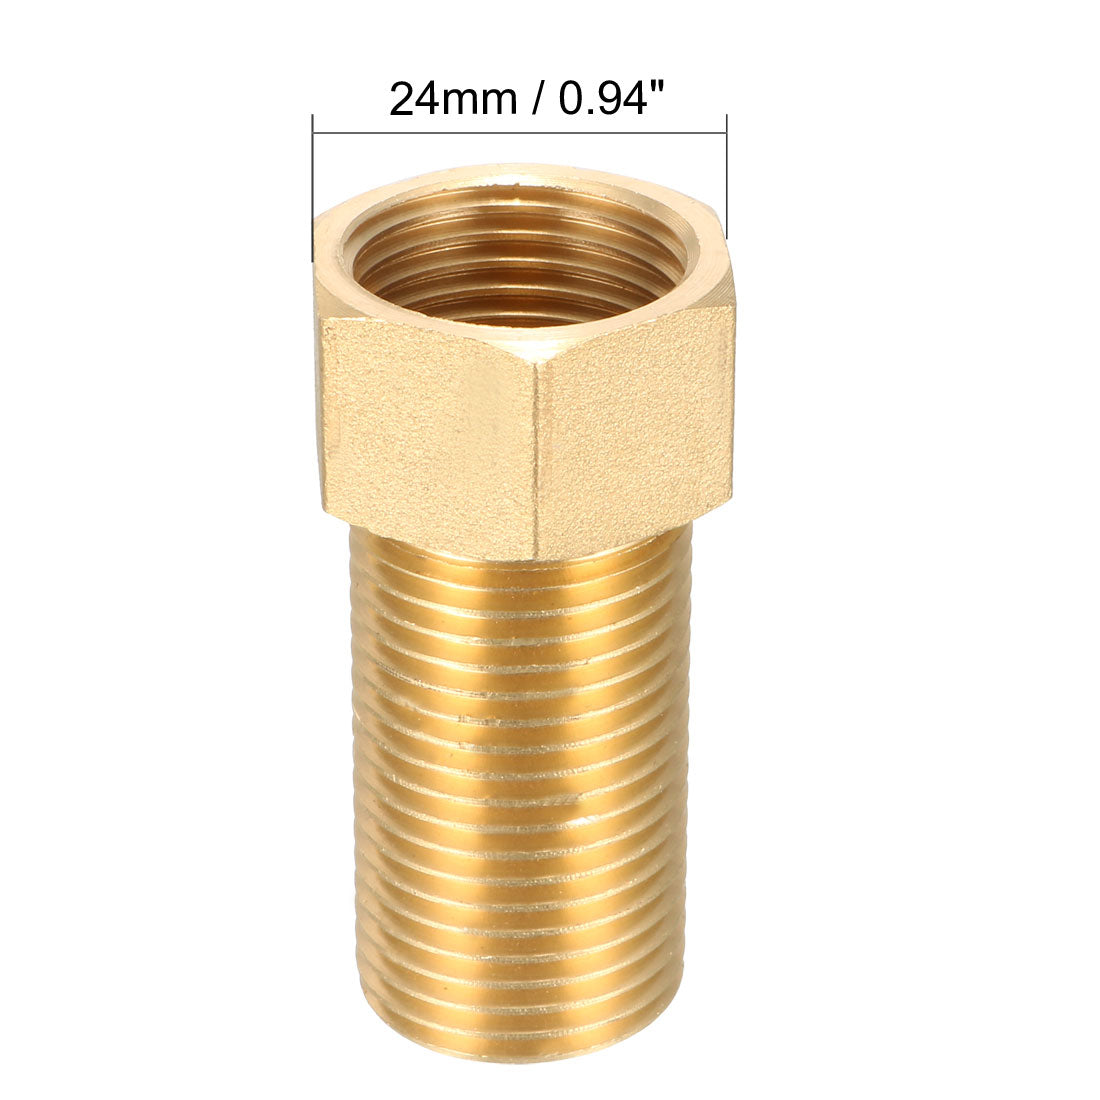 uxcell Uxcell Brass Threaded Pipe Fitting 1/2 PT Male x 1/2 PT Female Adapter 50mm Length